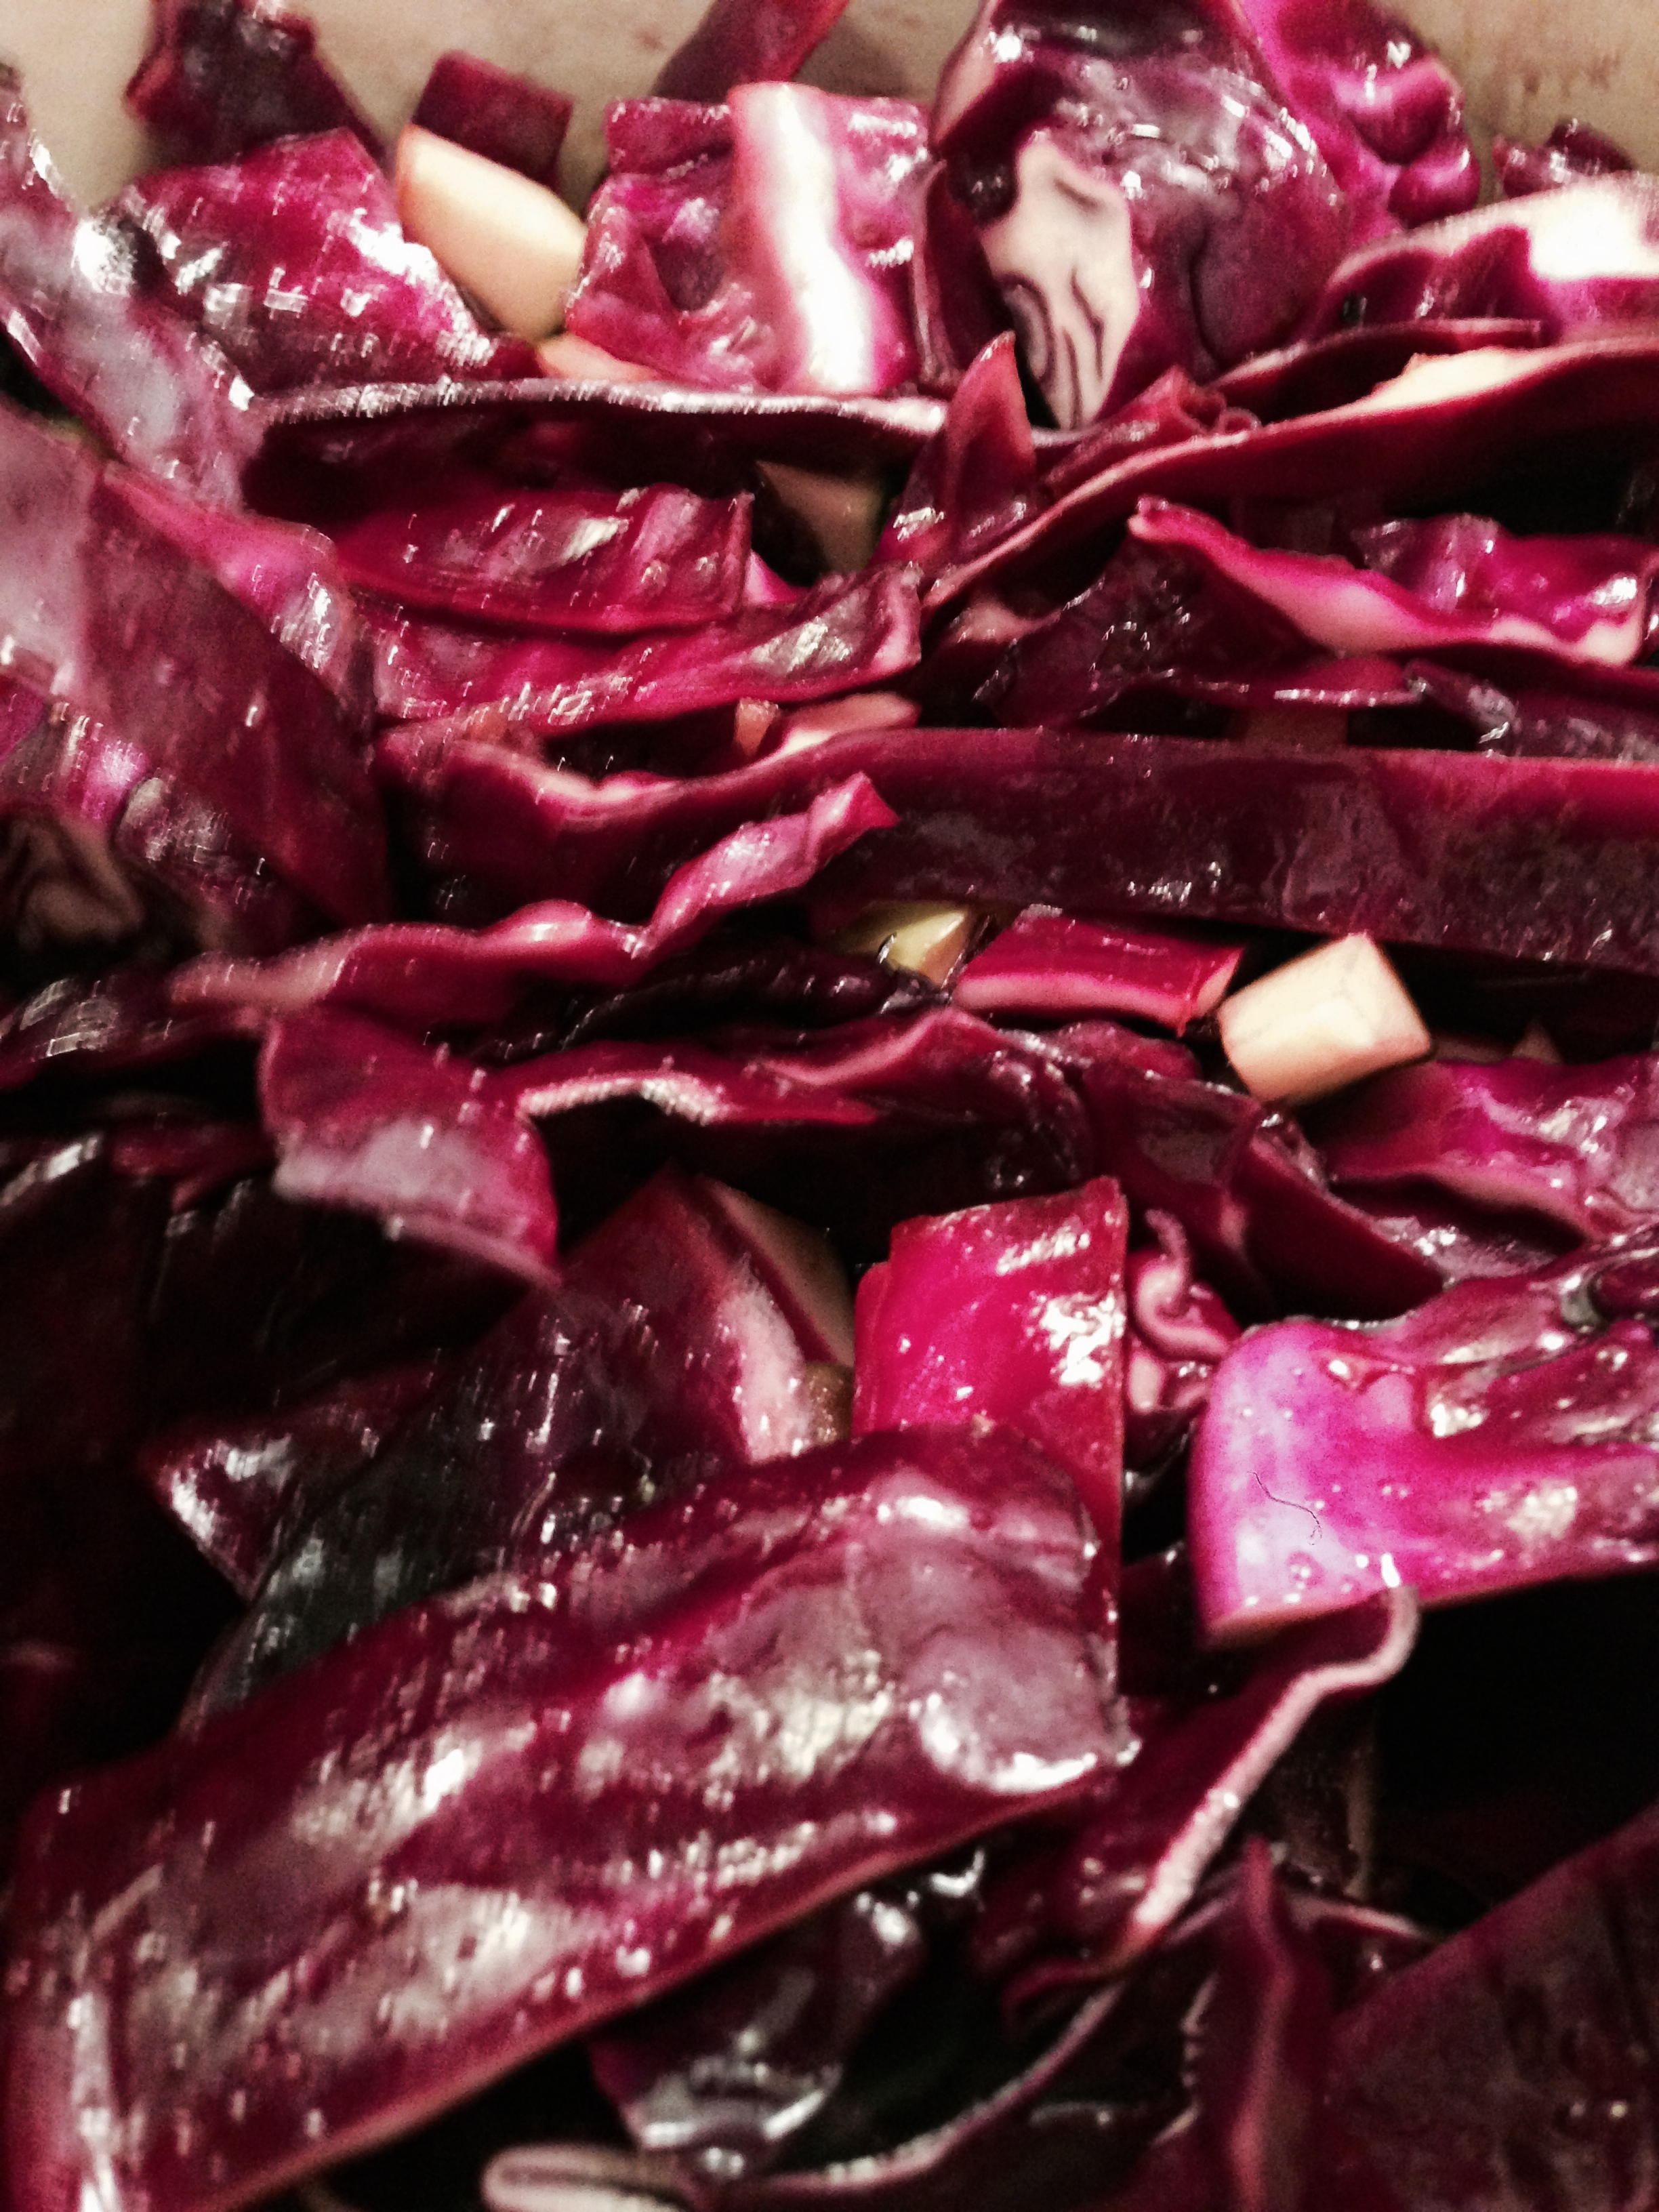 Cooking the red cabbage